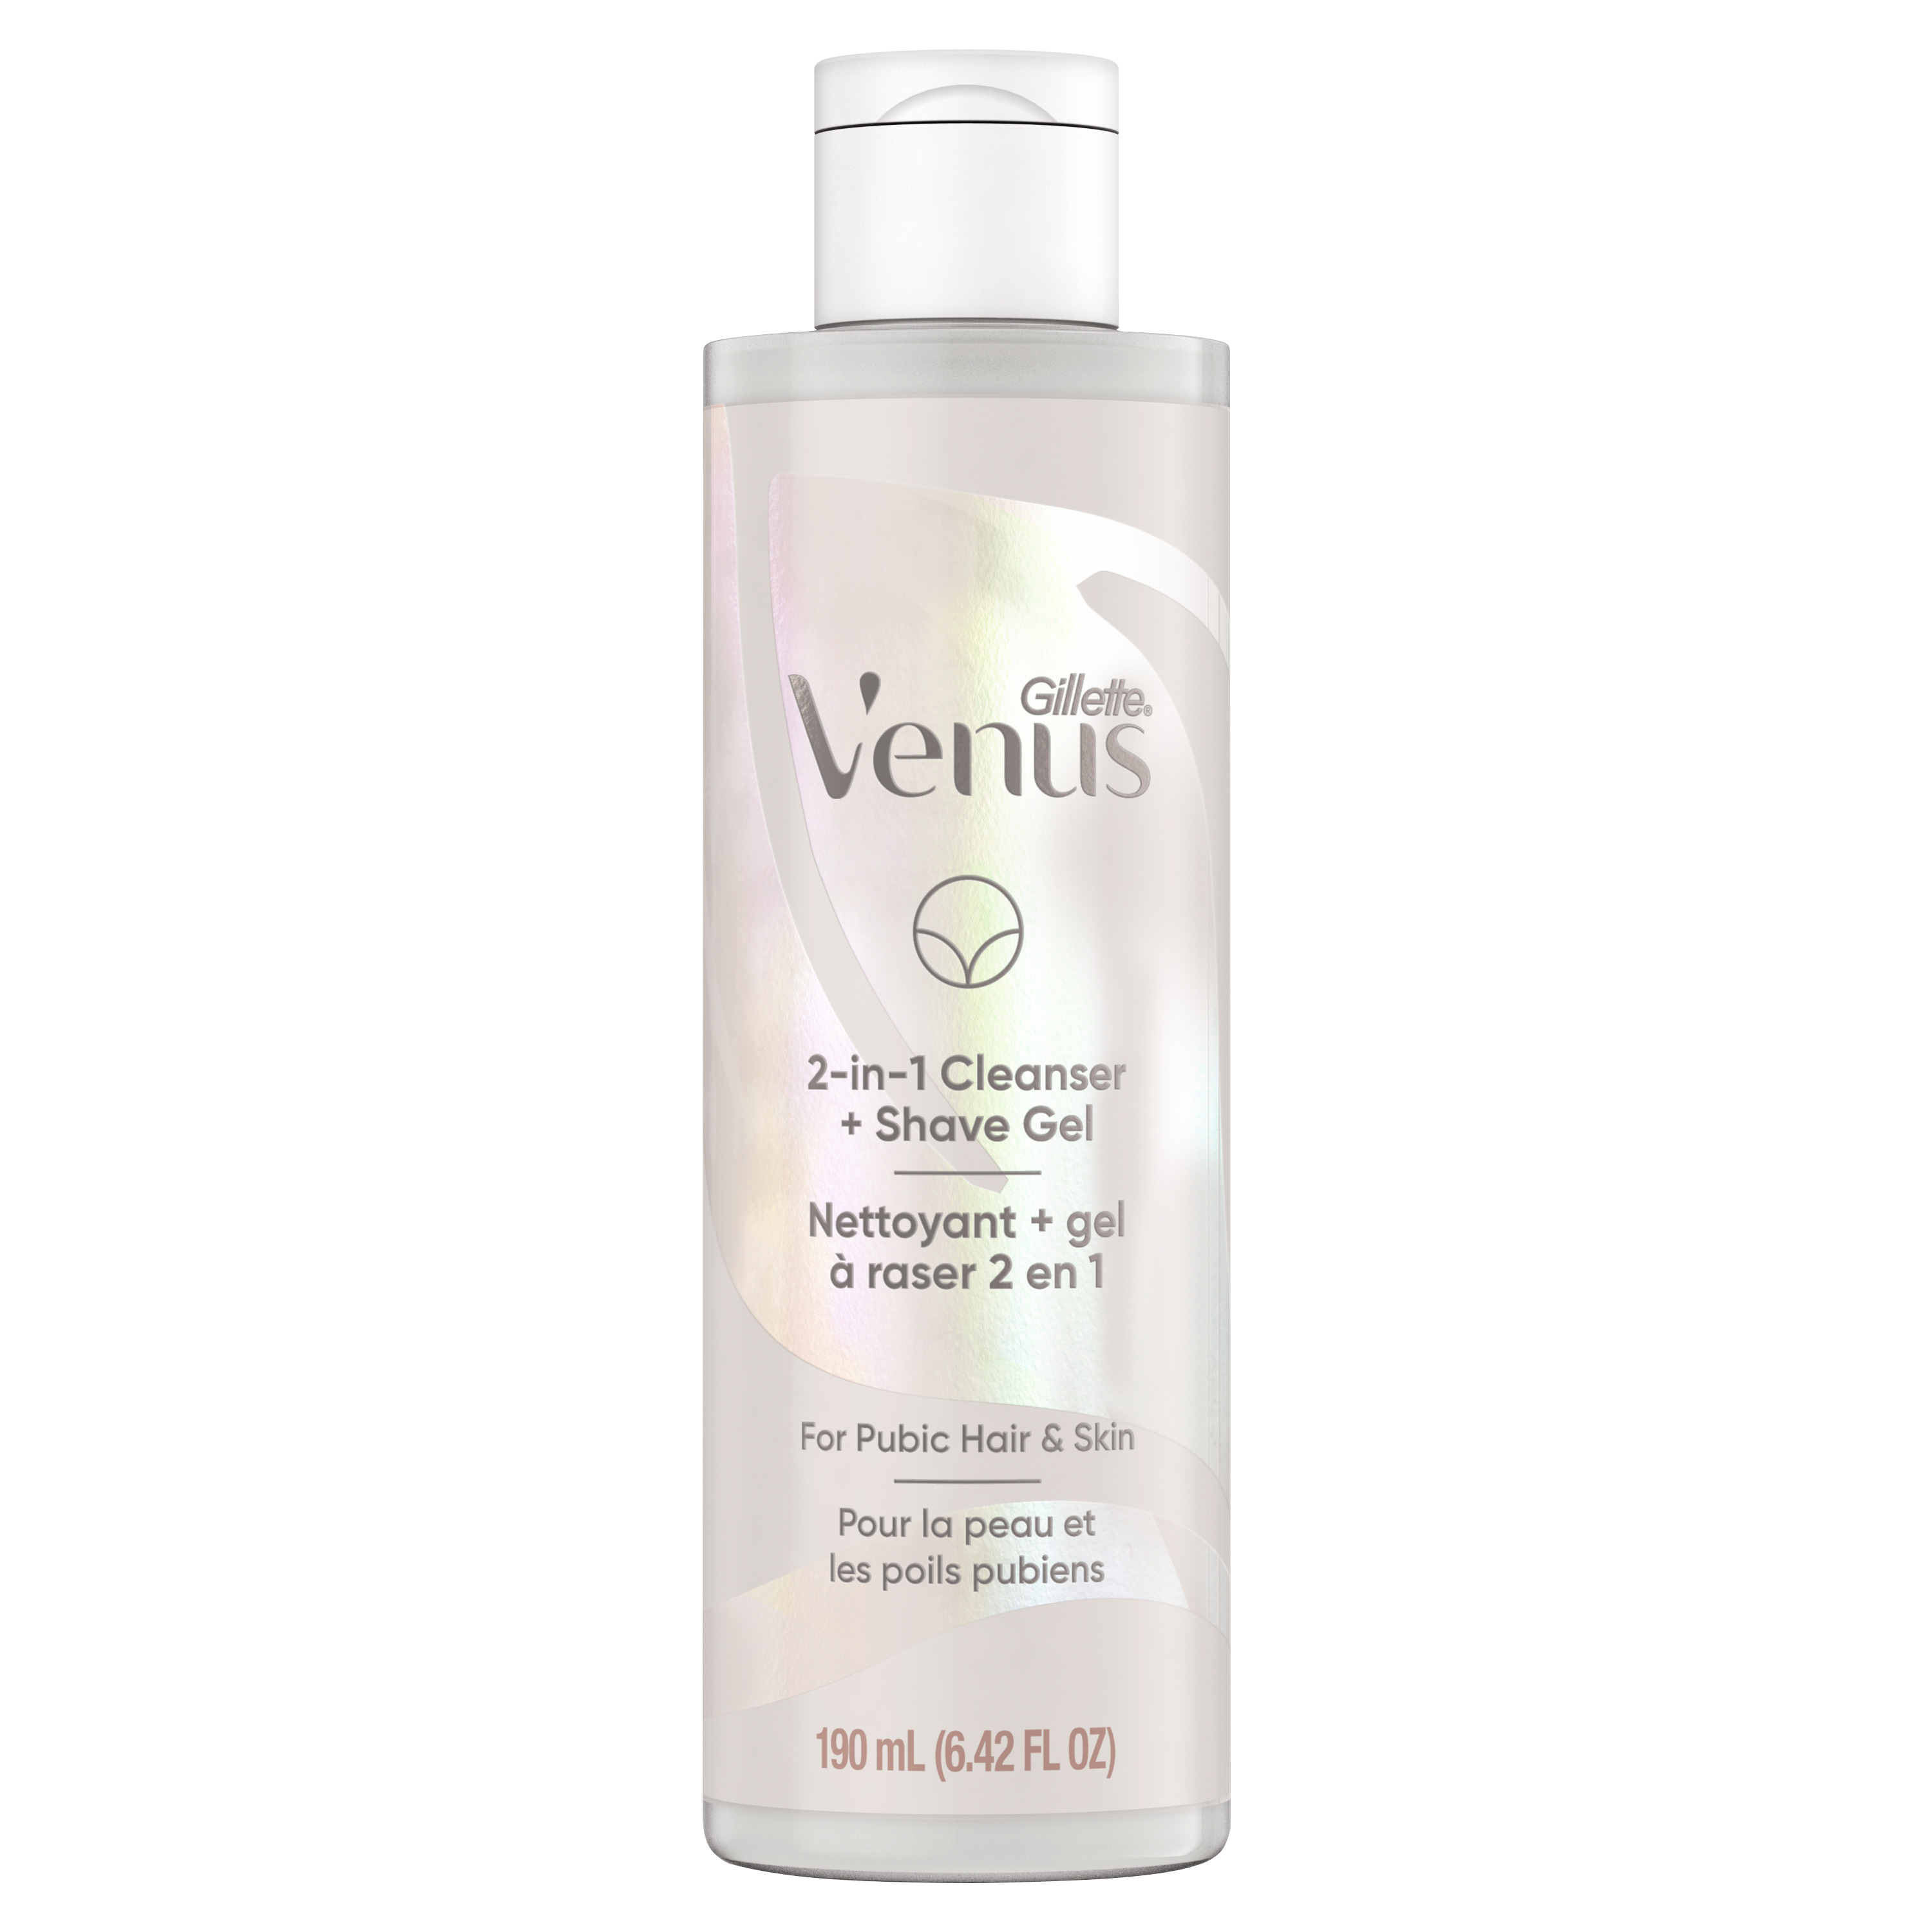 Gillette Venus for Female Pubic Hair and Skin, 2-in-1 Cleanser + Shave Gel, 6.4 oz, White - image 2 of 10